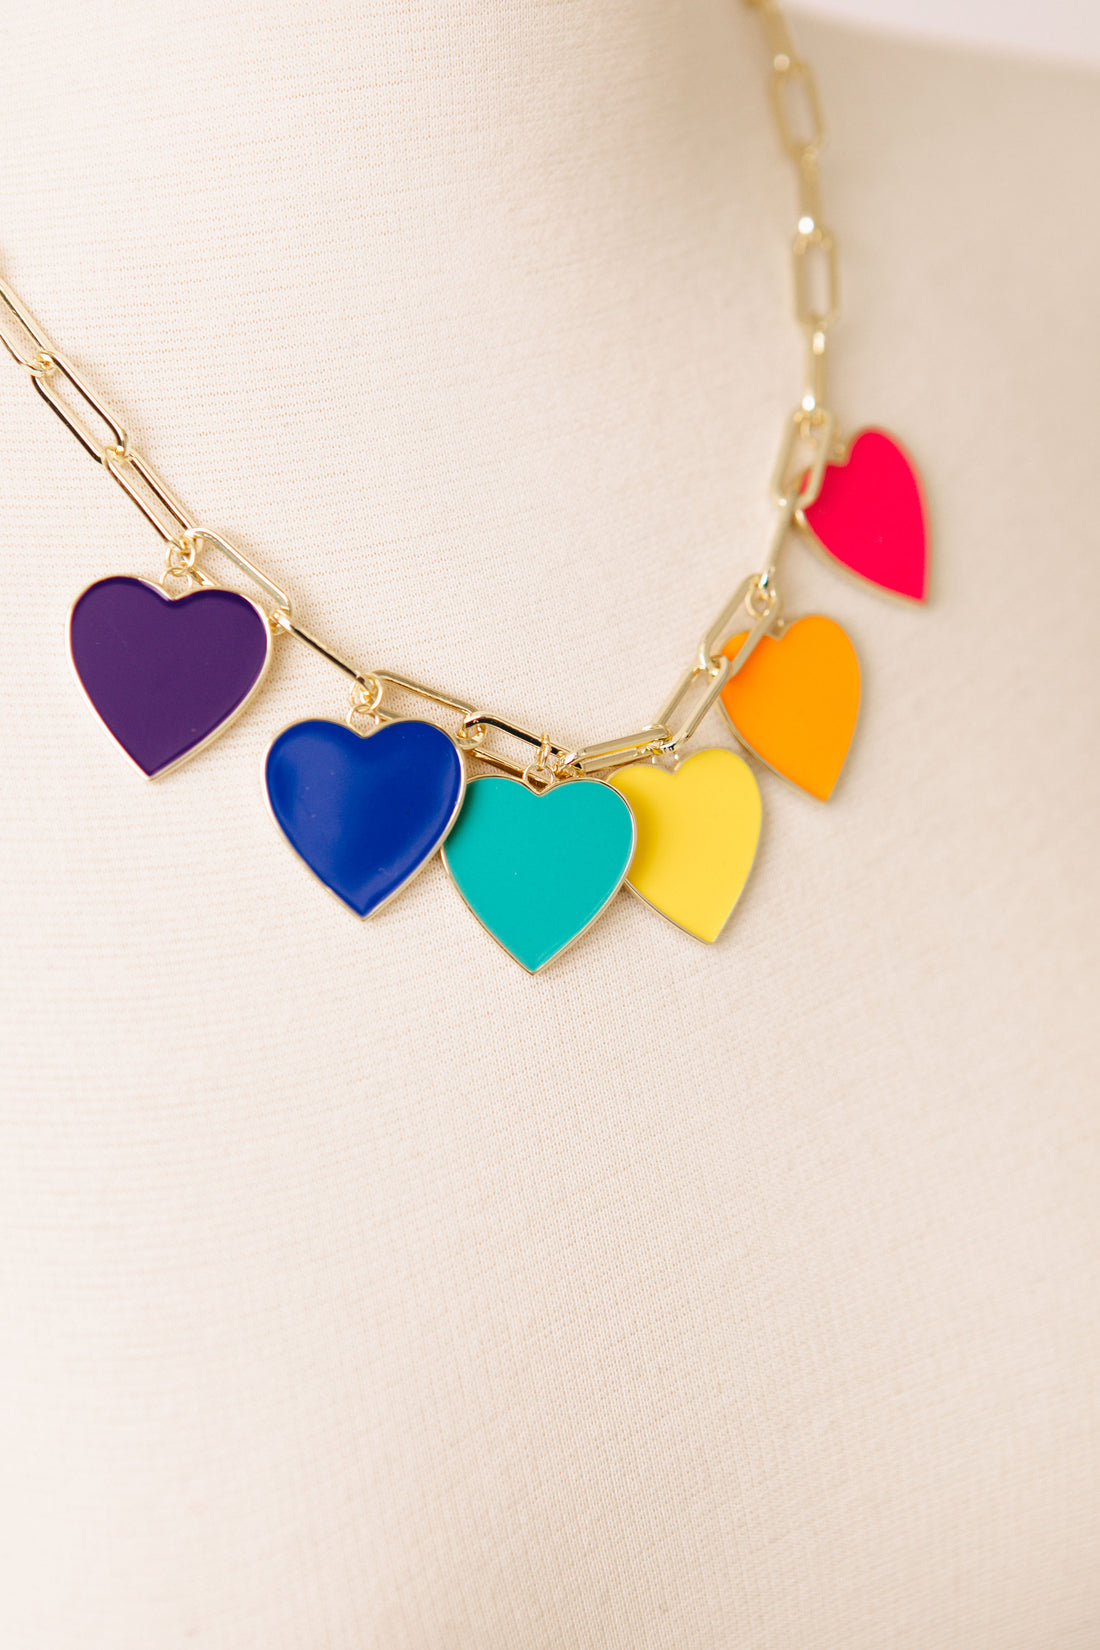 Ivy Exclusive - My Heart is Yours Necklace